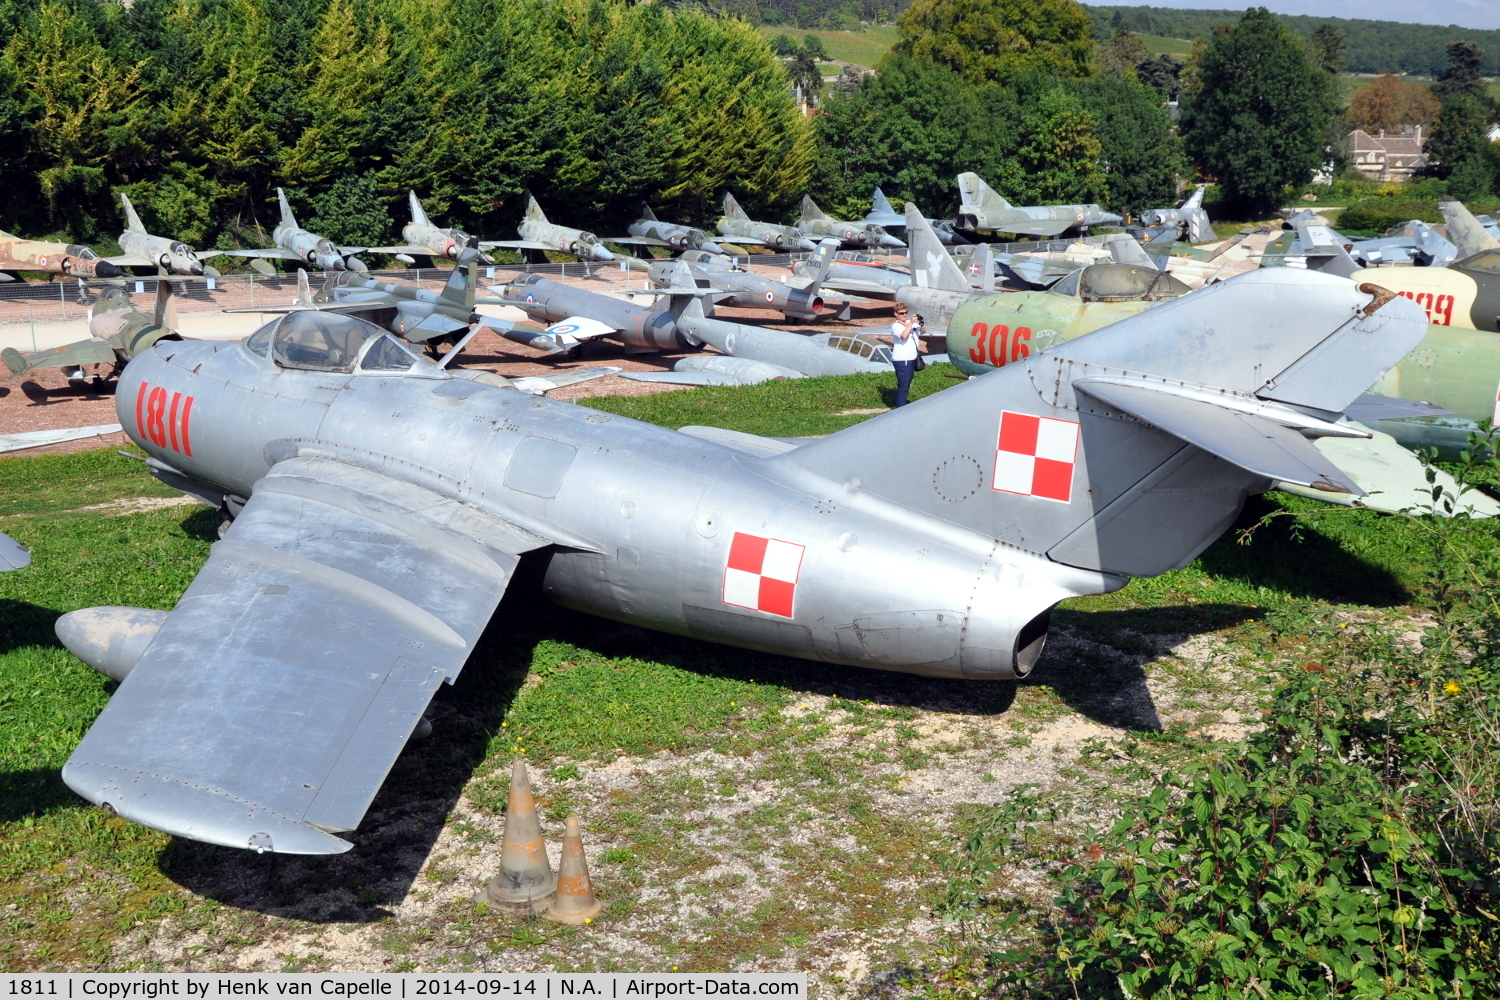 1811, Mikoyan-Gurevich LIM-2 C/N 1B-01811, PZL-Mielec Lim-2 (MiG-15bis) fighter of the Polish Air Force preserved at the Chateau de Savigny aircraft museum.